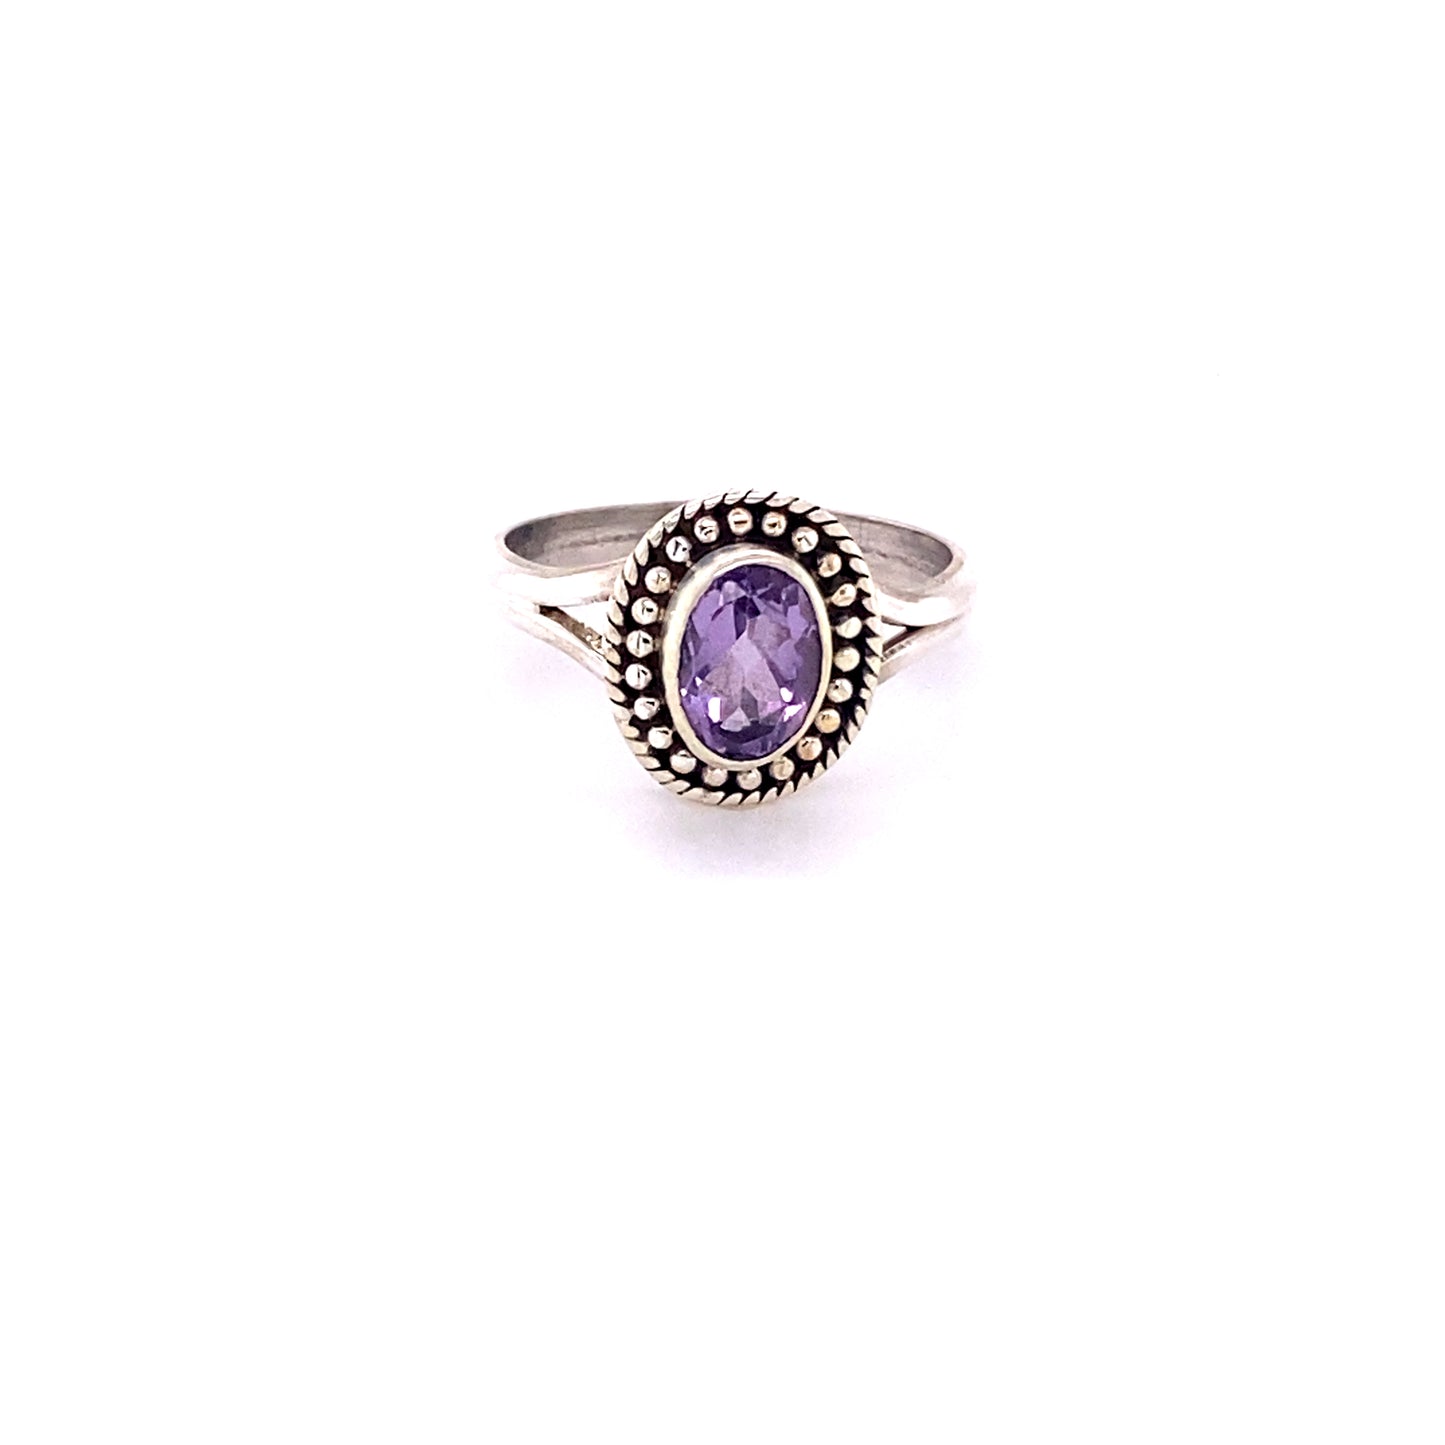 Oval Gemstone Ring with Ball Disk Rope Border in sterling silver.